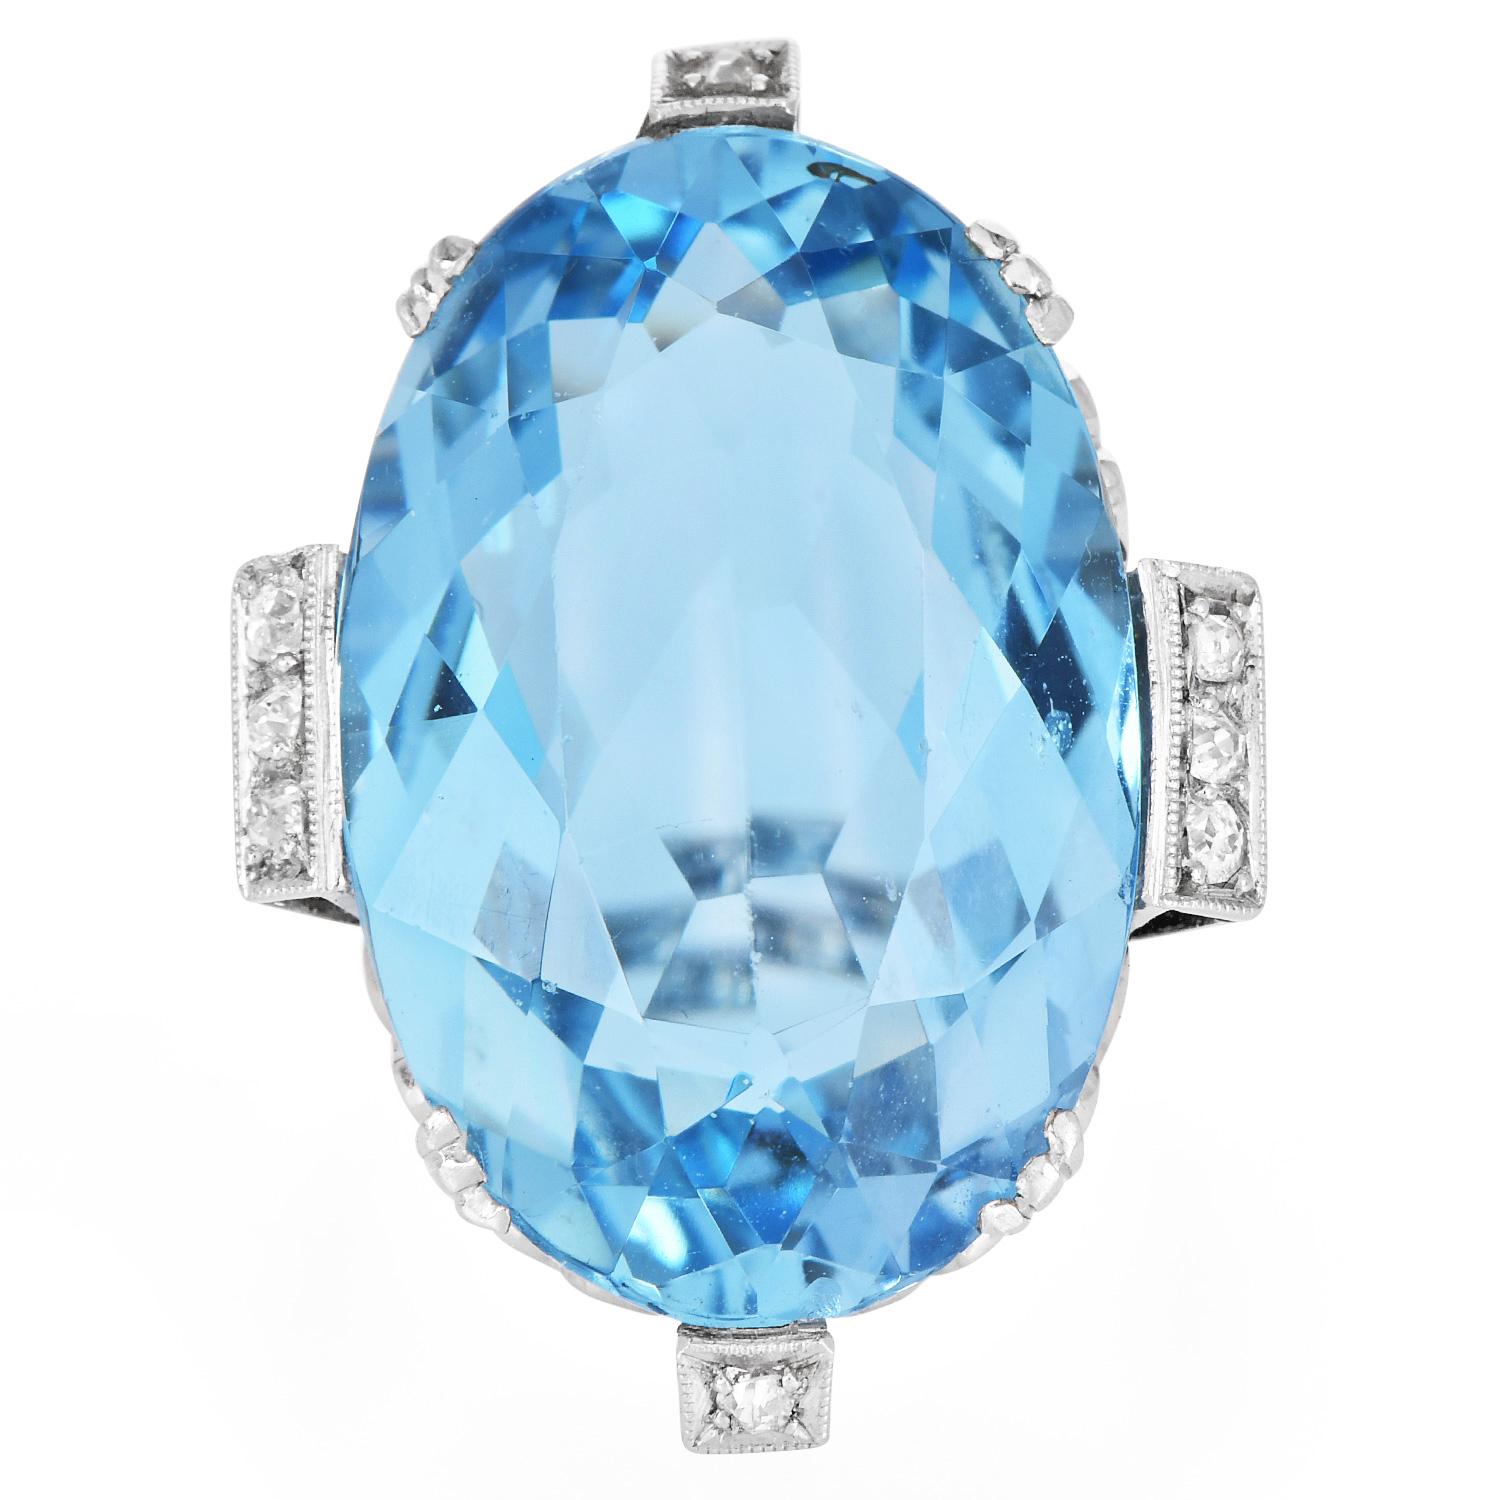 This stunning vintage ring circa 1950 chic ring to own! An Elegant Vintage Retro ring with very Fine Antique Oval Shape Aquamarine in ocean blue color GIA certified measuring: 23.35mm x 15.40mm x 8.58mm and weighing approx. 16.73 carats and set in